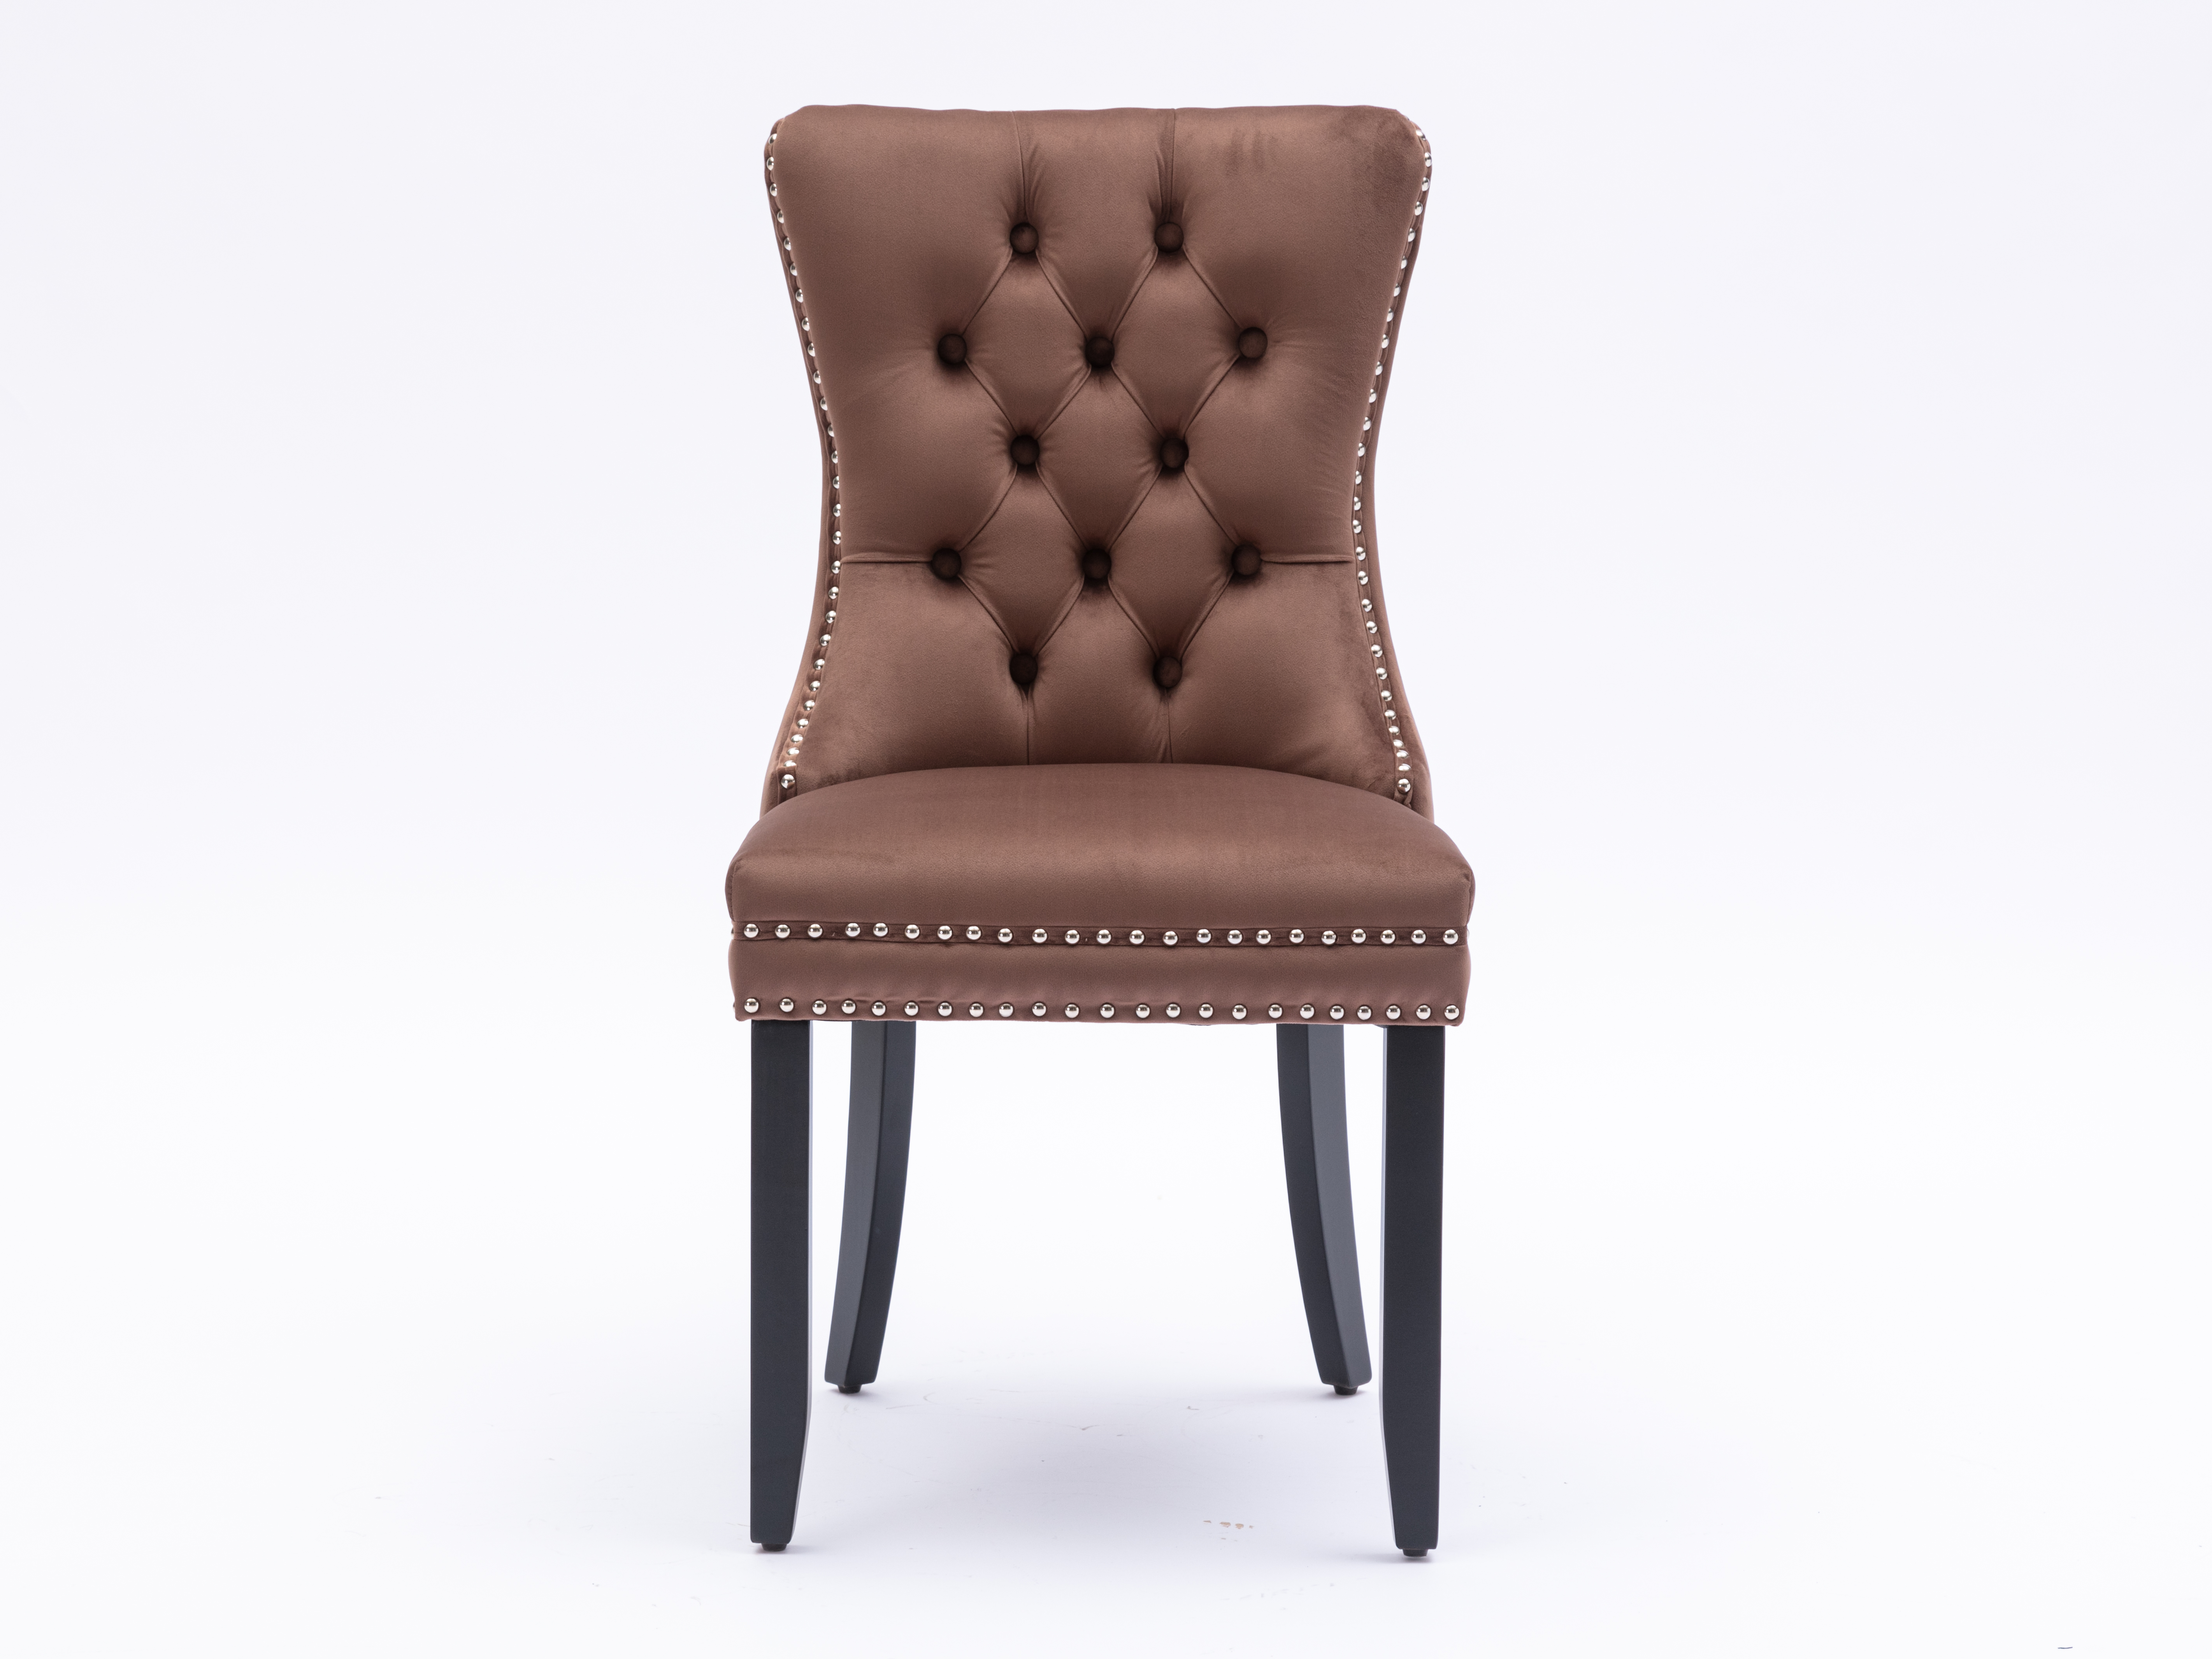 Upholstered Button Tufted Back Brown Velvet Dining Chair with Nailhead Trim and Solid Wood Legs 2 Sets-Boyel Living